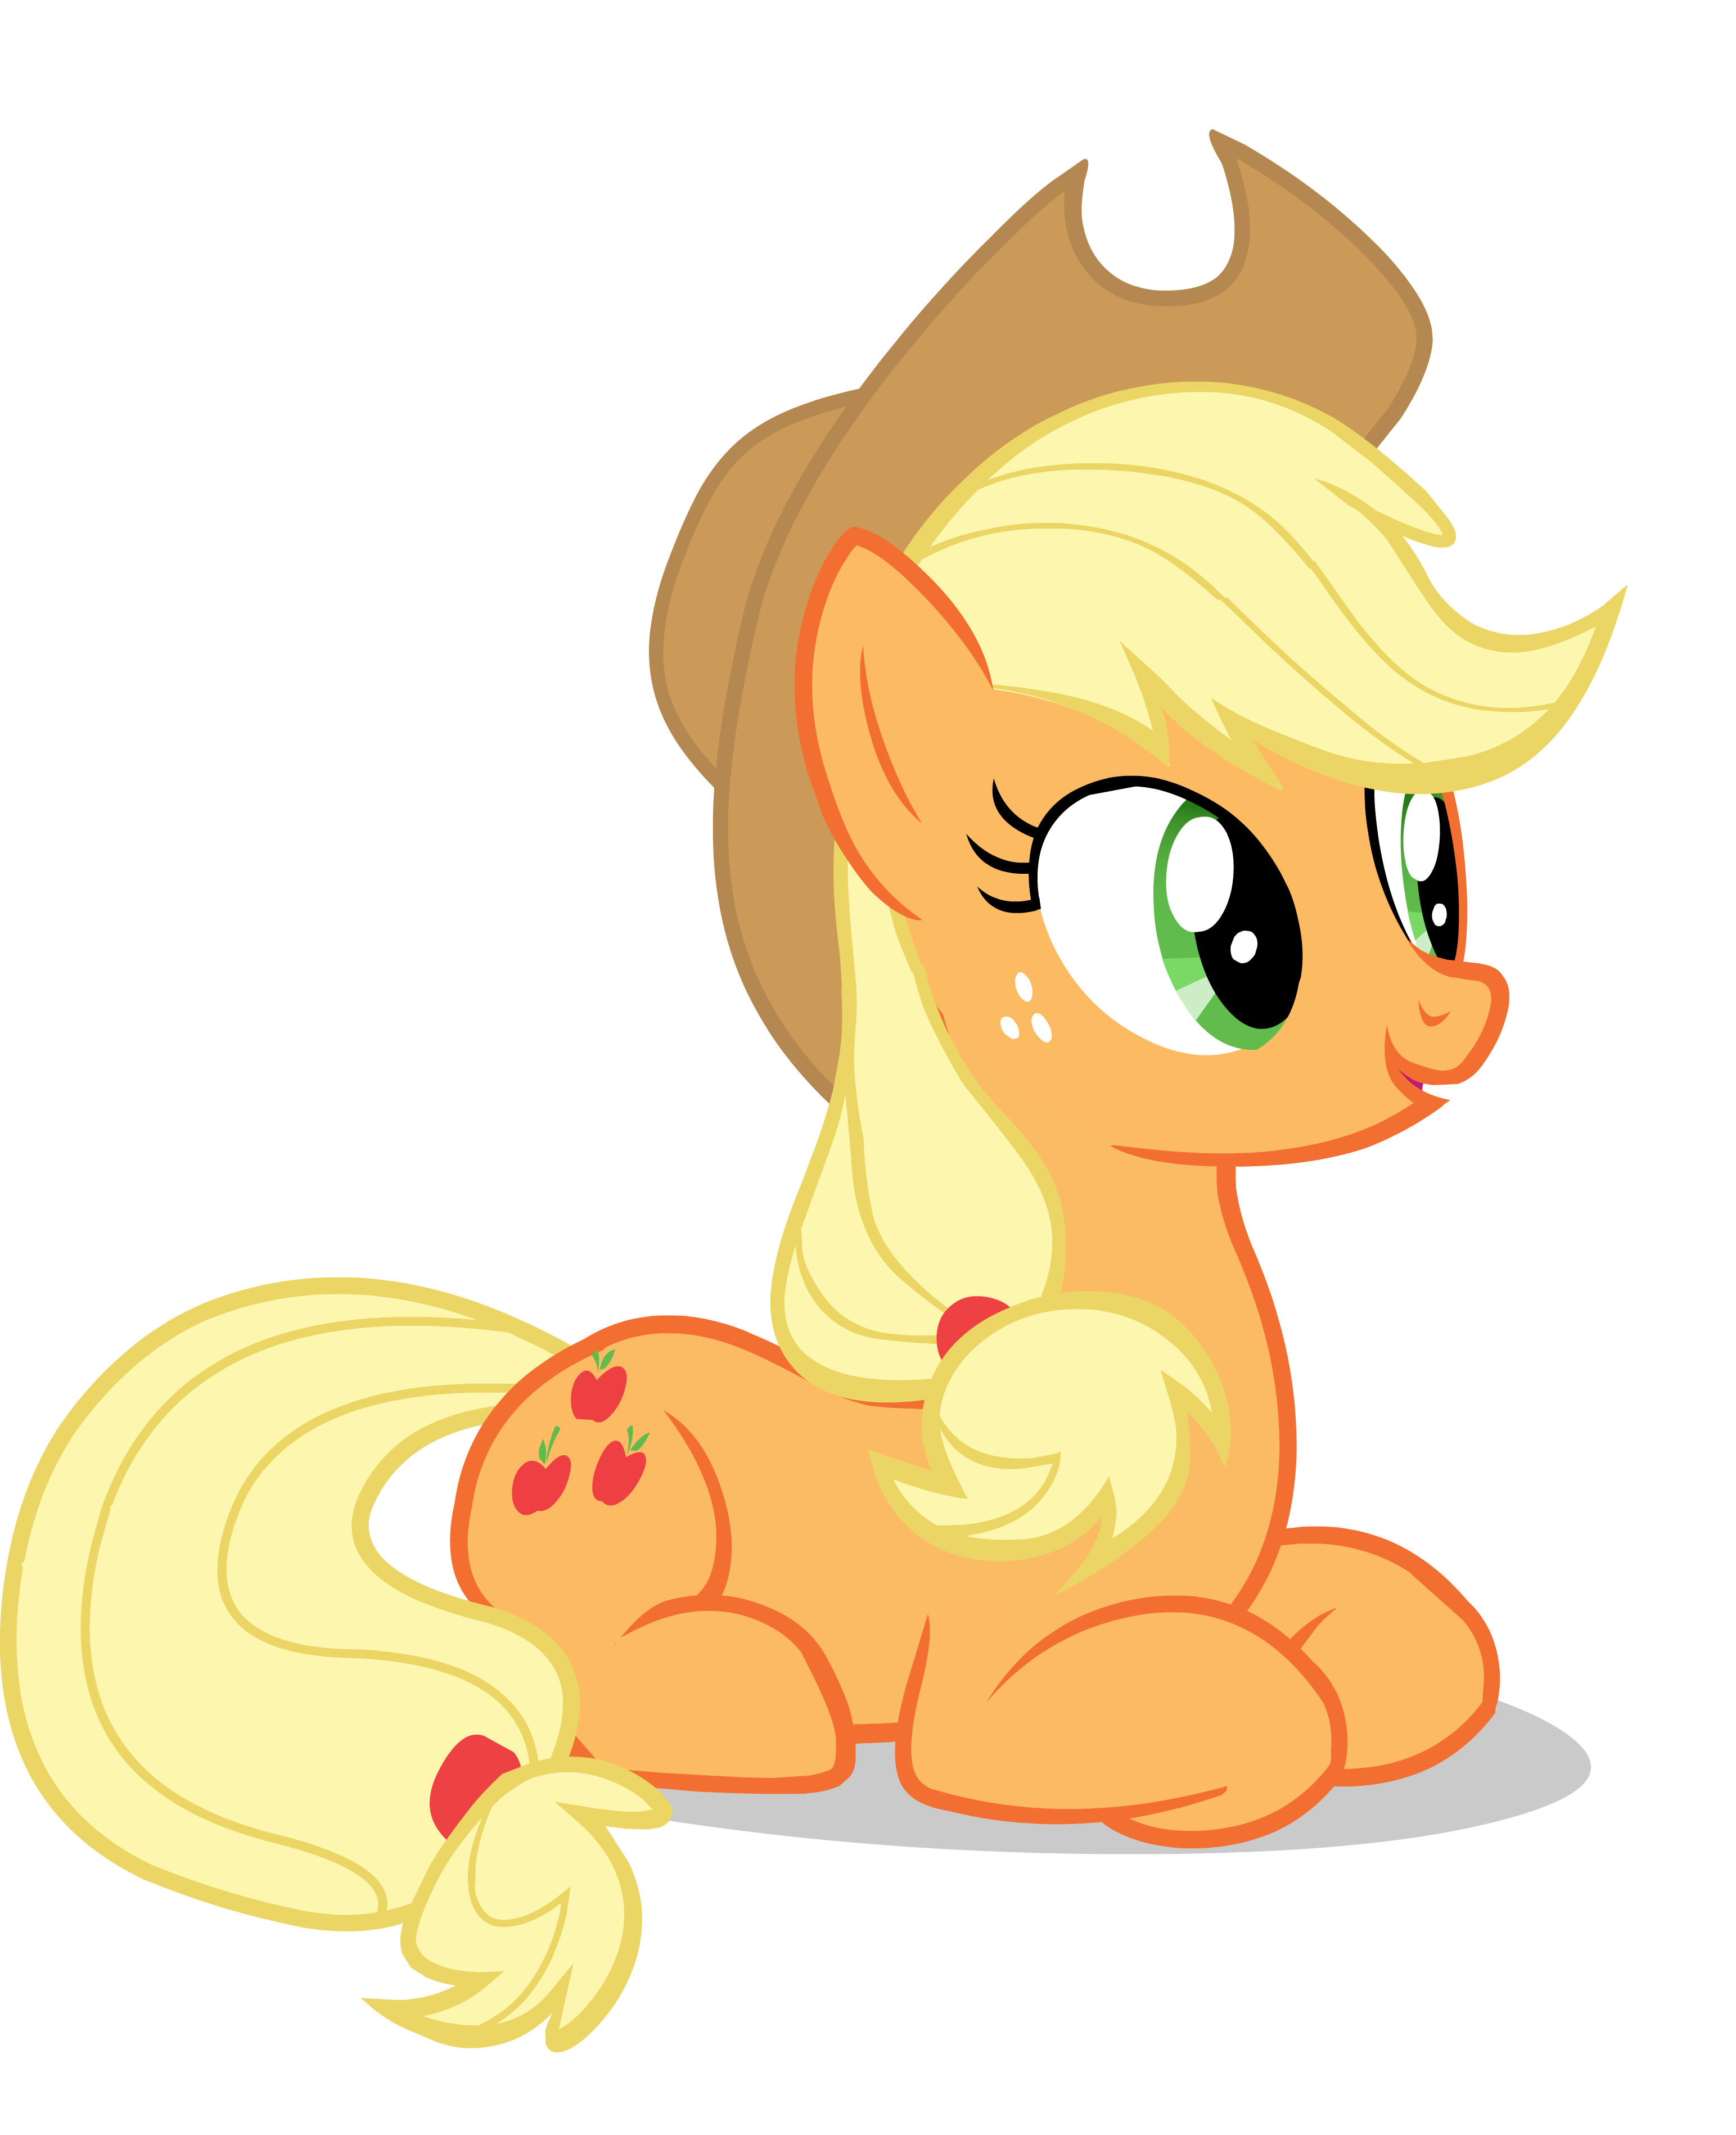 http://img2.wikia.nocookie.net/__cb20140201104942/mlp/images/9/96/FANMADE_Applejack_laying_down_vector.png